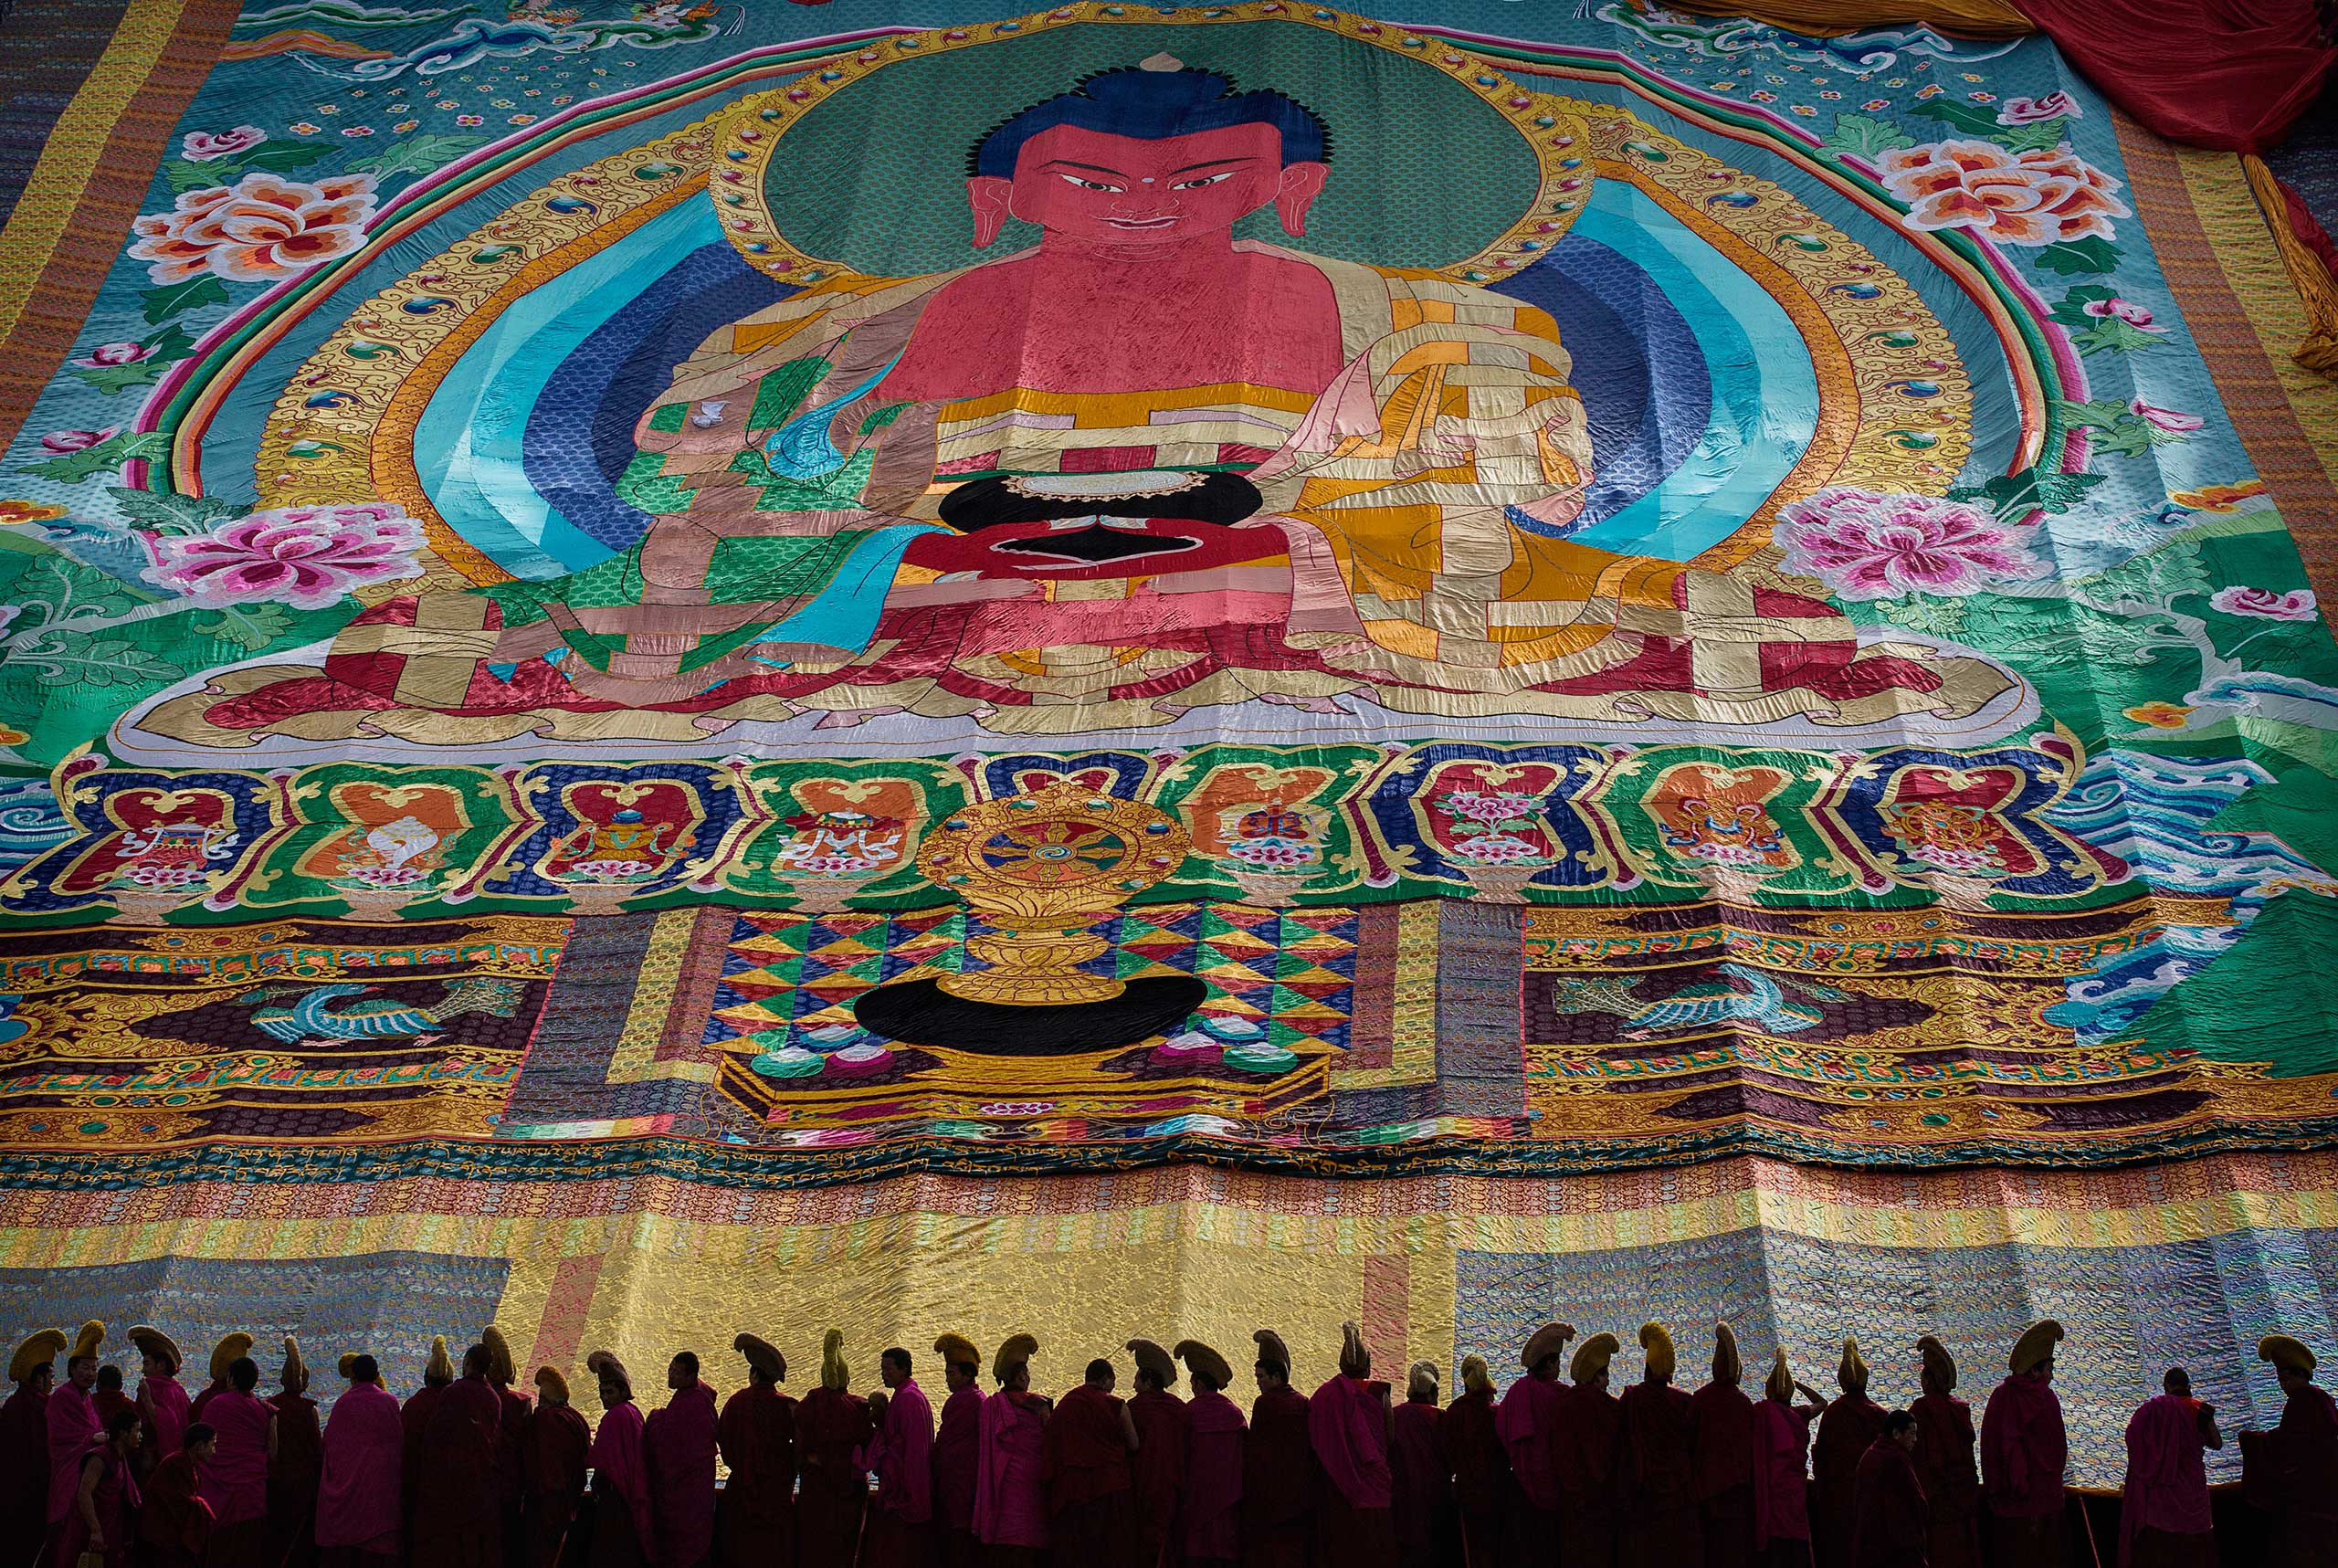 From the series: Tibetan Buddhists Celebrate Religion And Culture at Great PrayerTibetan Buddhist monks stand below a large painting of the Buddhaduring Monlam or the Great Prayer rituals at the Labrang Monastery, Xiahe County, Amdo, Tibetan Autonomous Prefecture, Gansu Province, China, March 3, 2015.